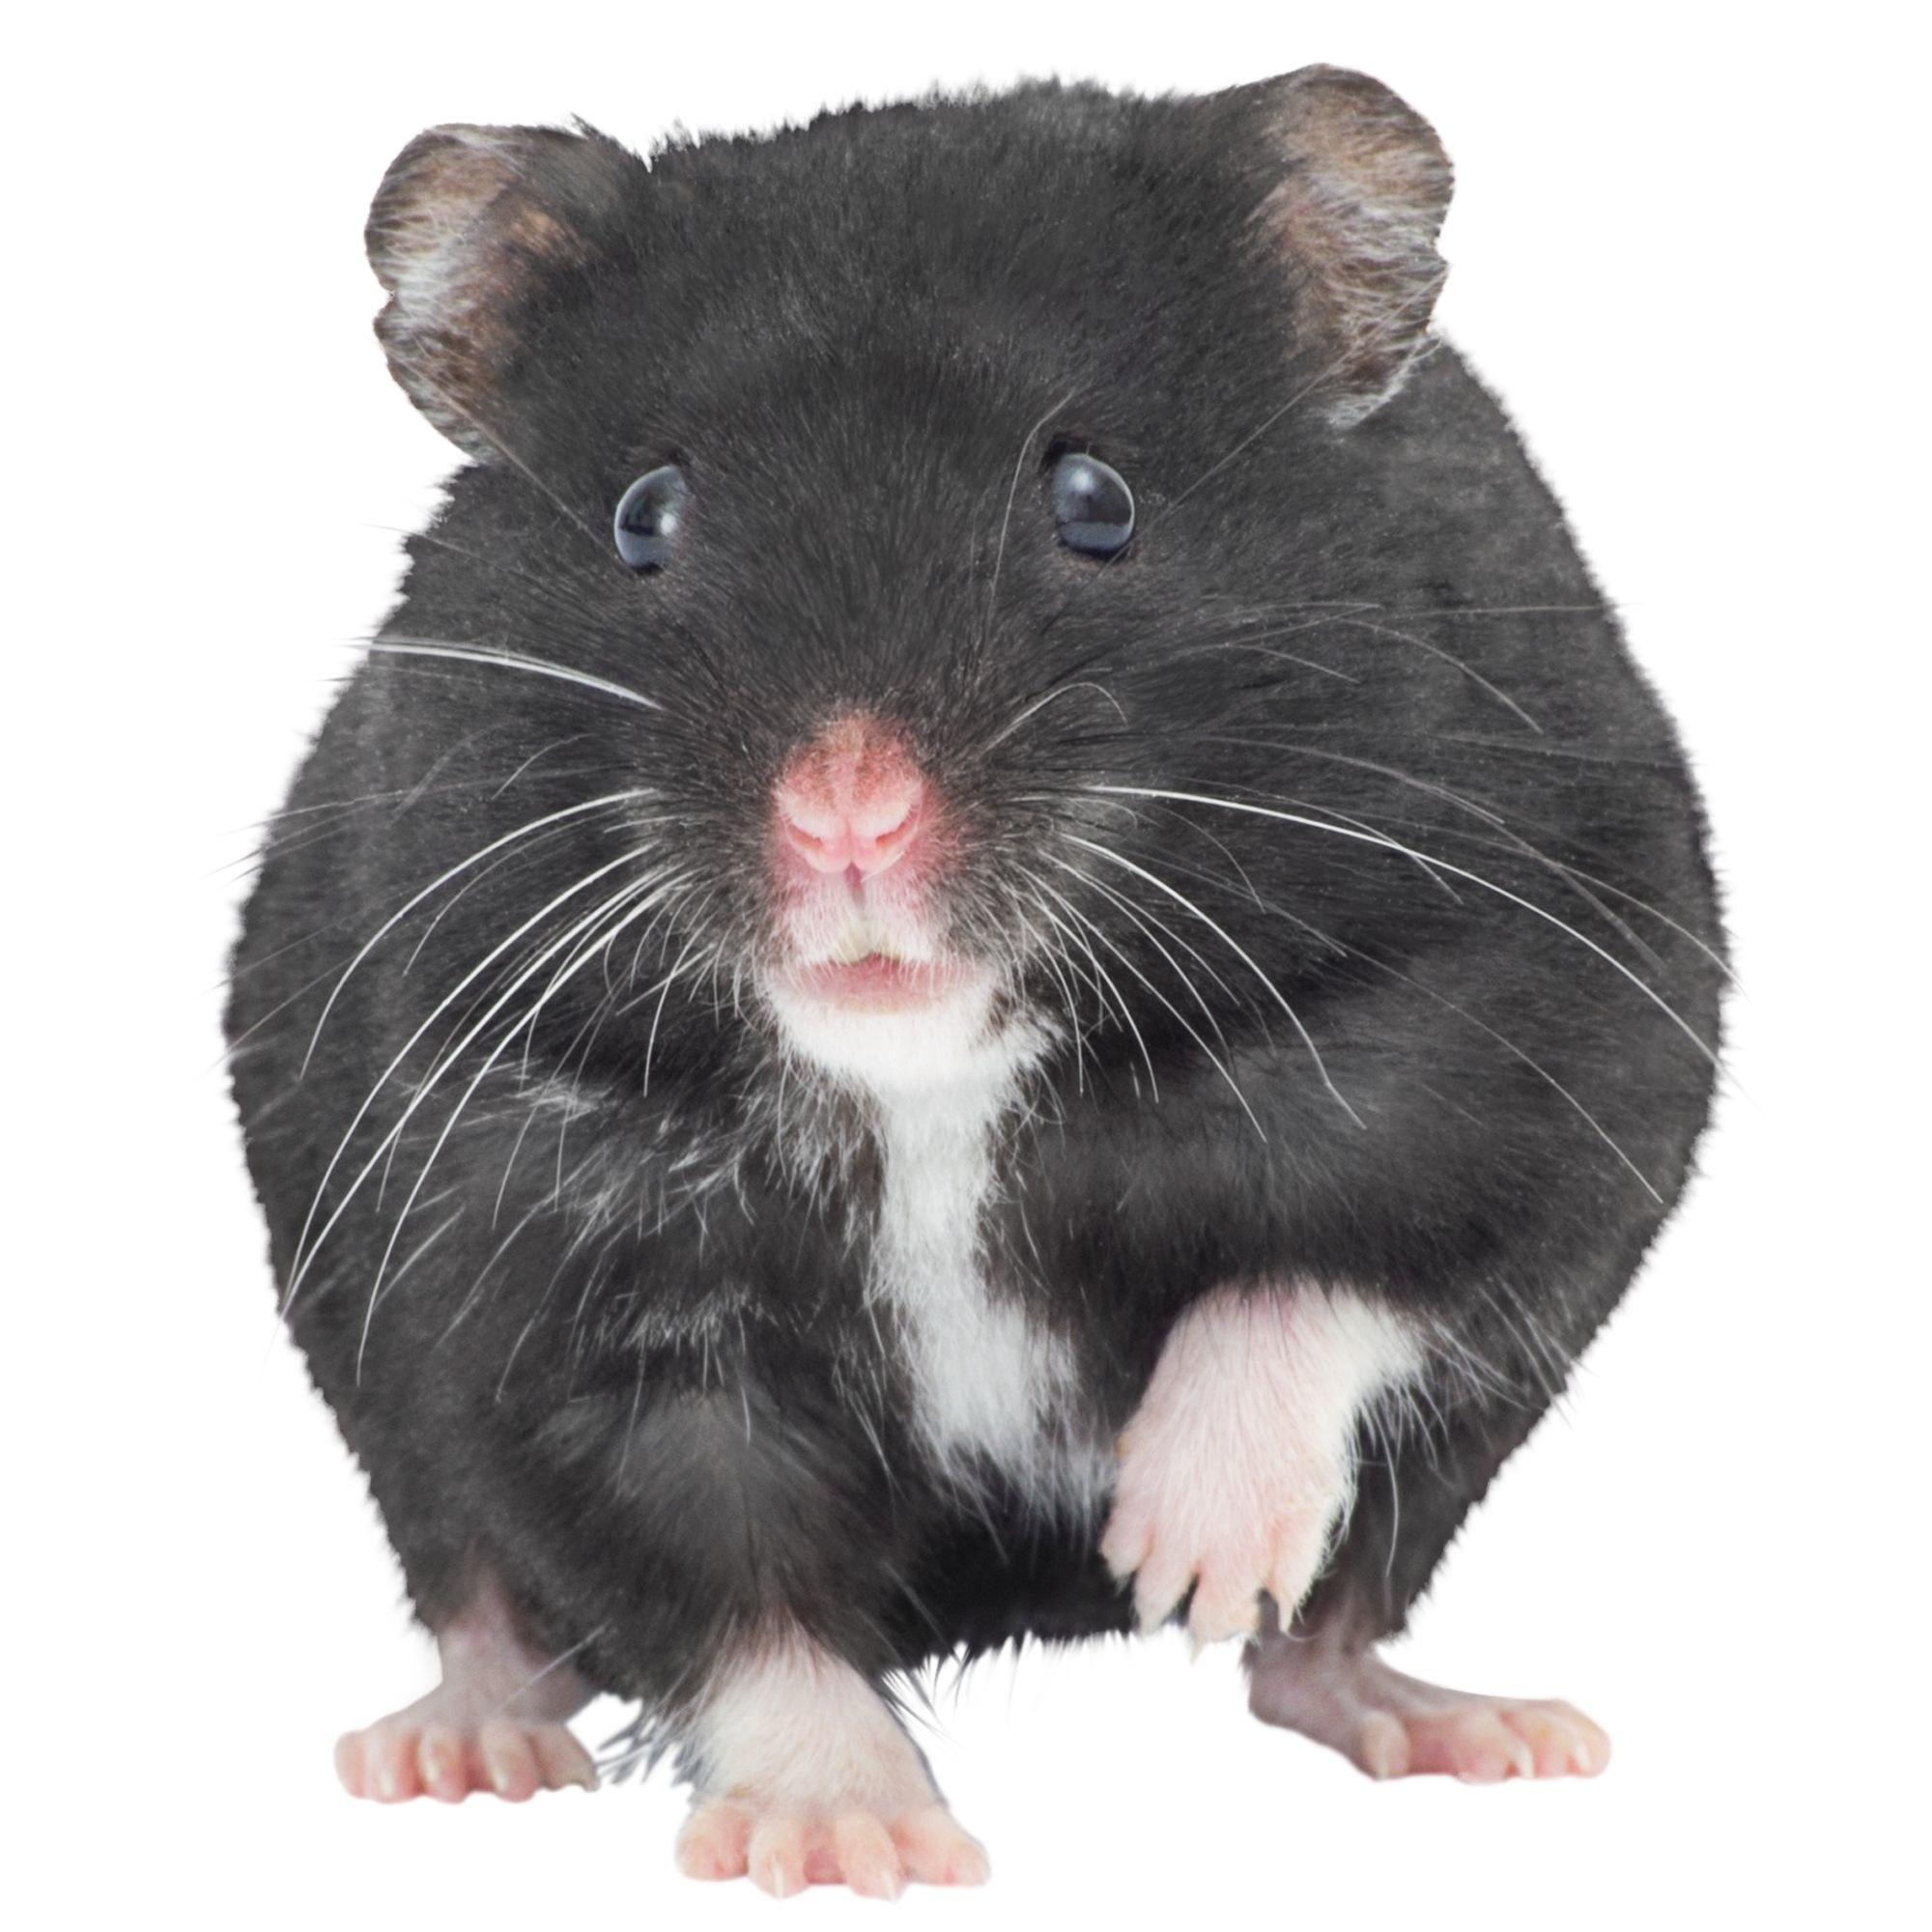 Black Hamster with a white stripe down its chest